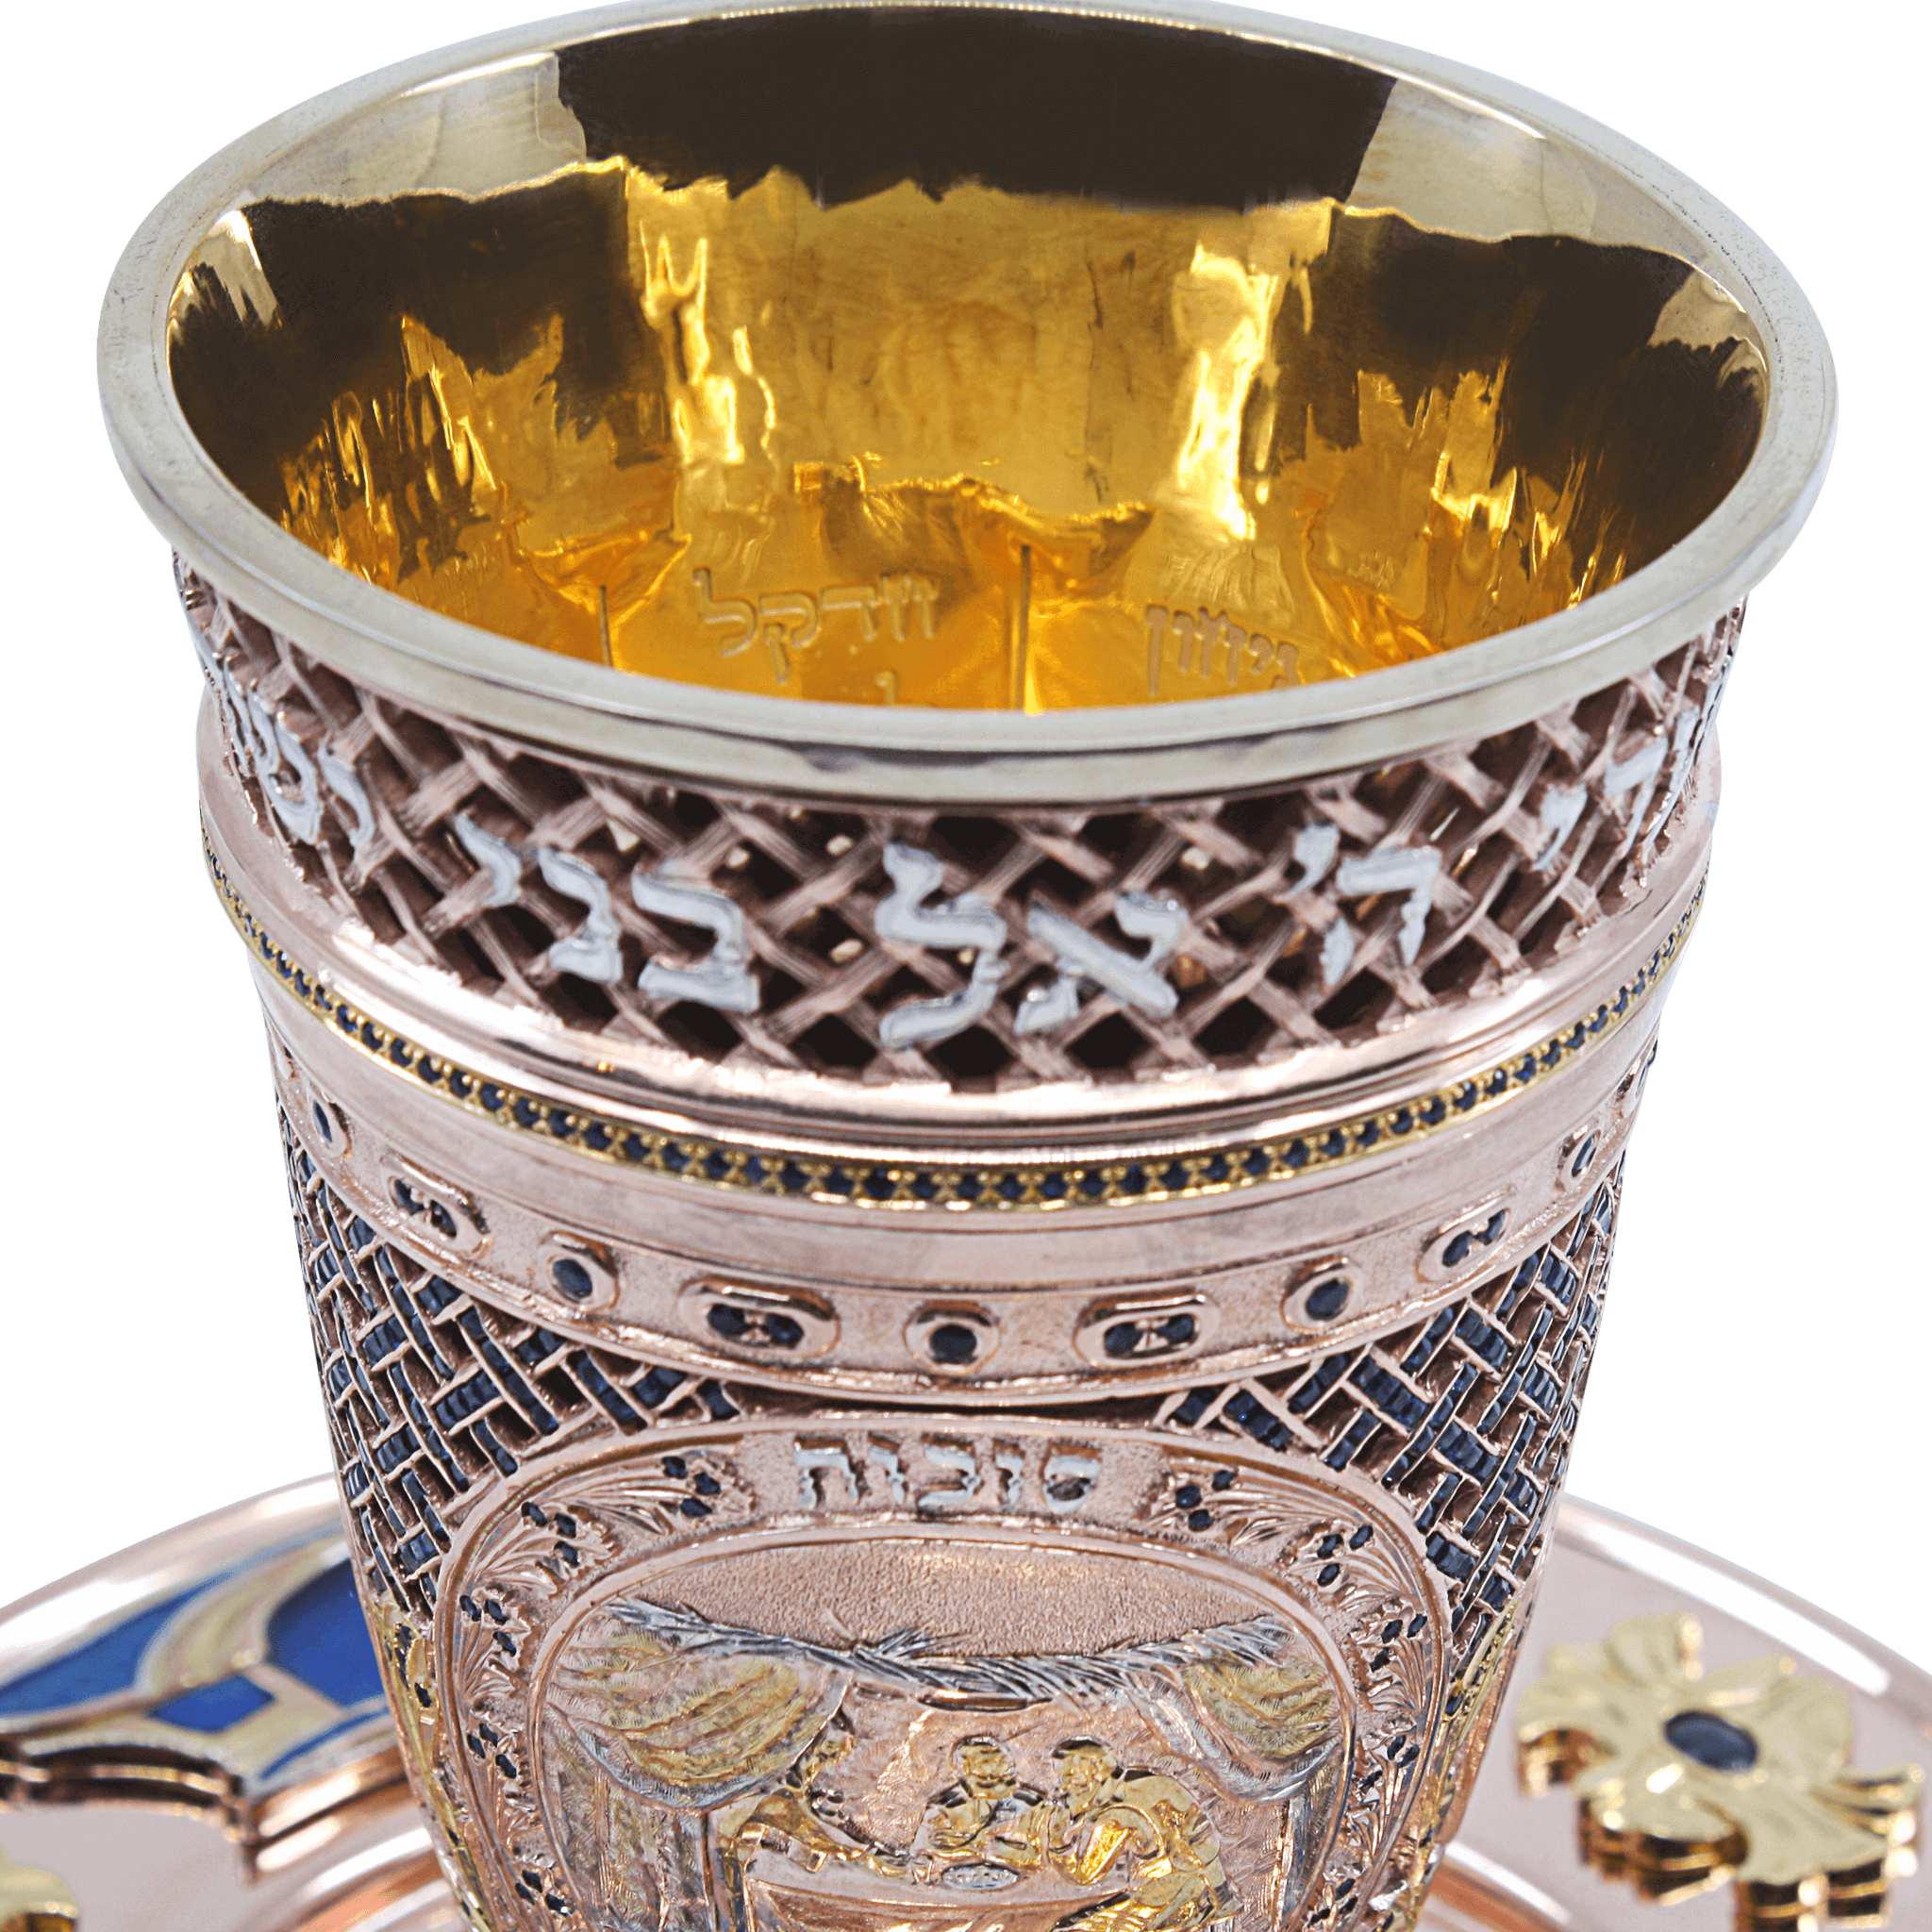 Passover Cup and Plate Set - Piece By Zion Hadad